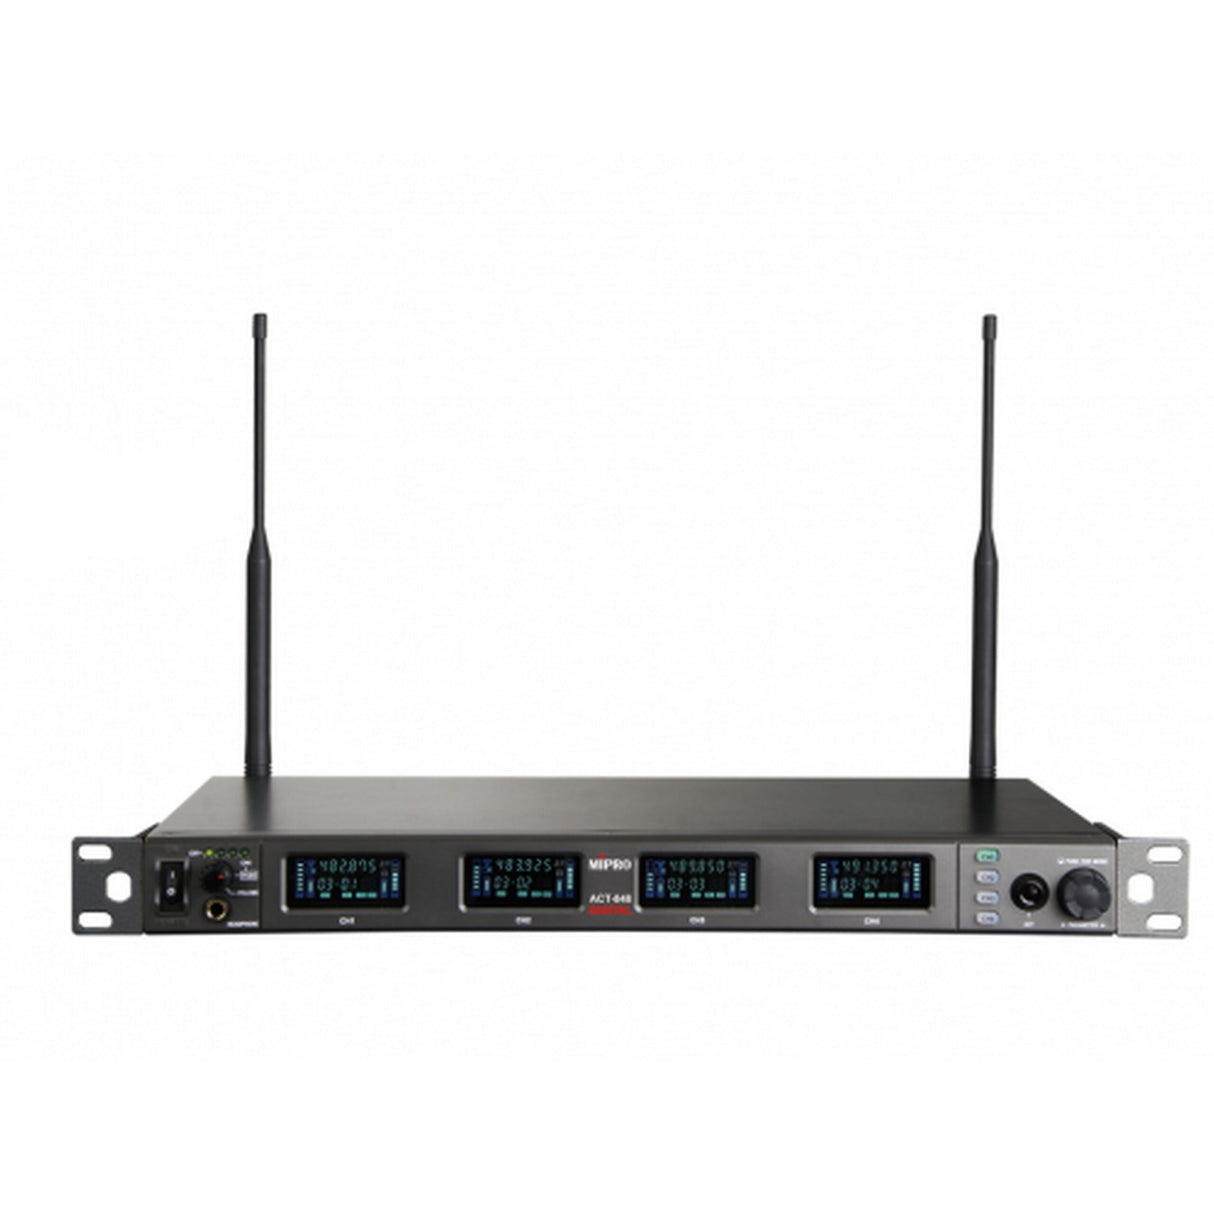 MIPRO ACT-848 1U Quad-Channel UHF Wideband Digital Receiver without Dante, 5F